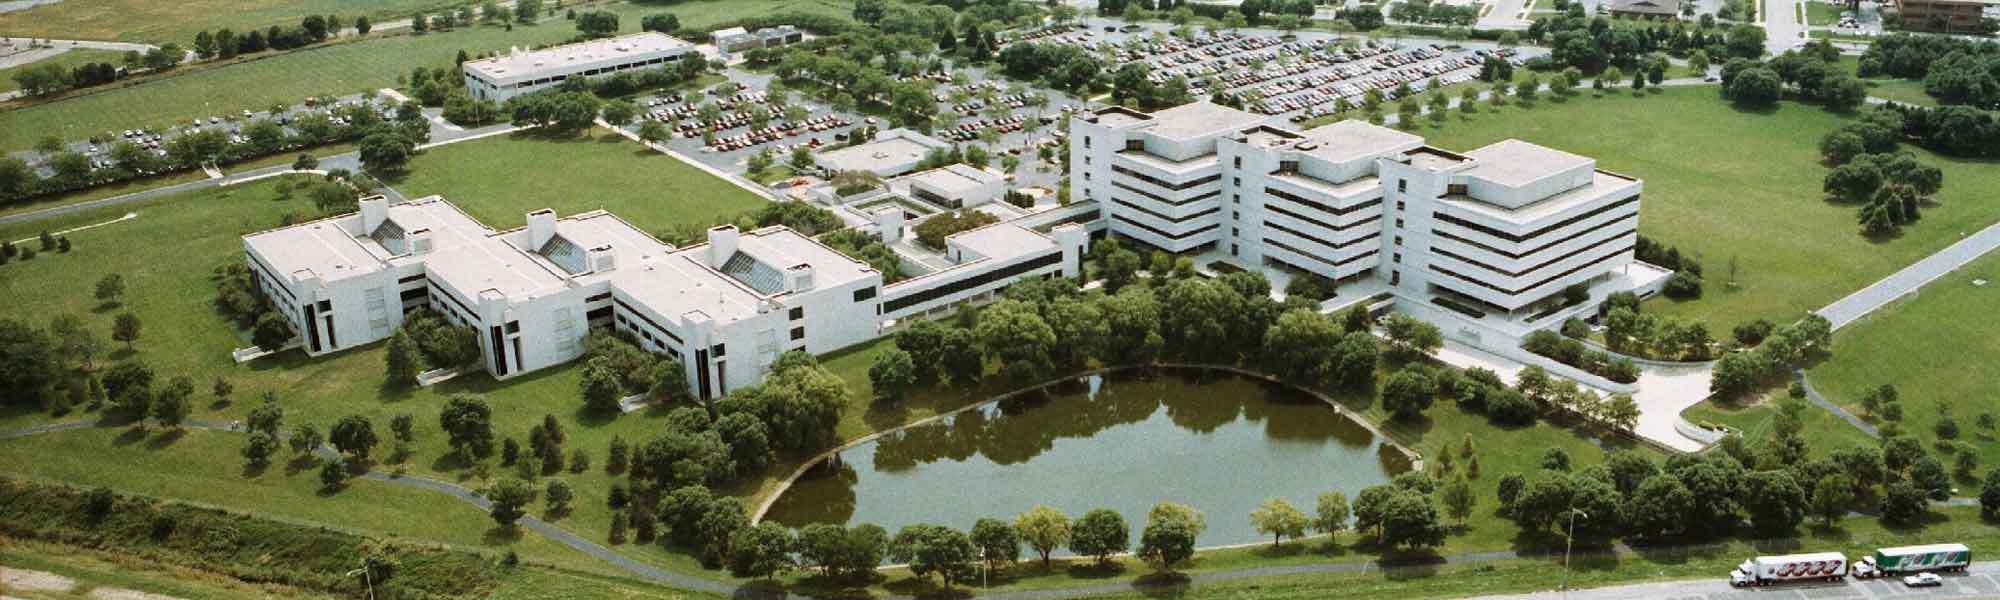 Naperville Headquarters and Research Facility